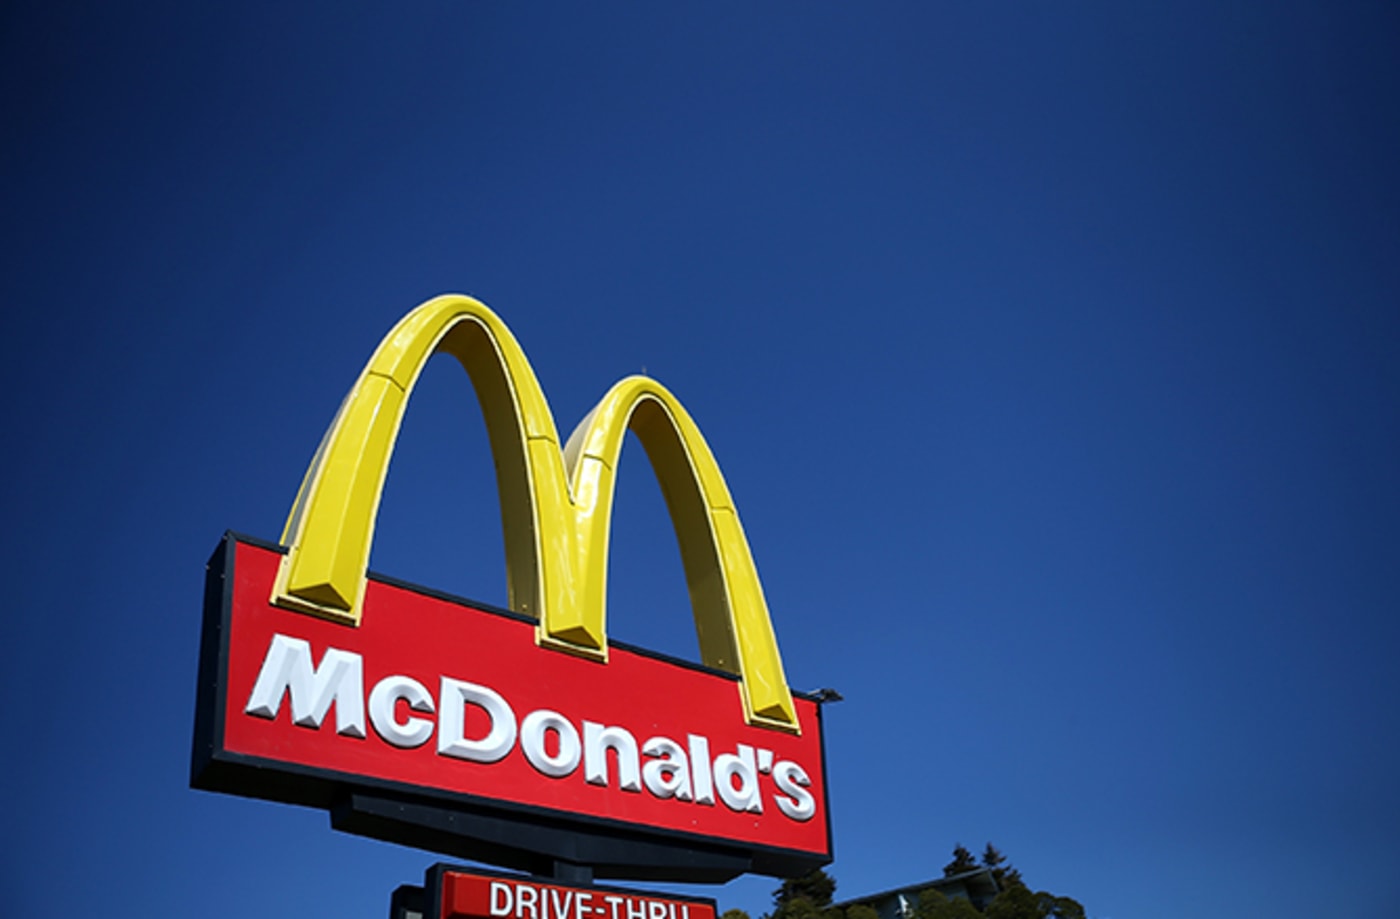 McDonald's Wins Black Friday With Funny Twitter Flub | Complex